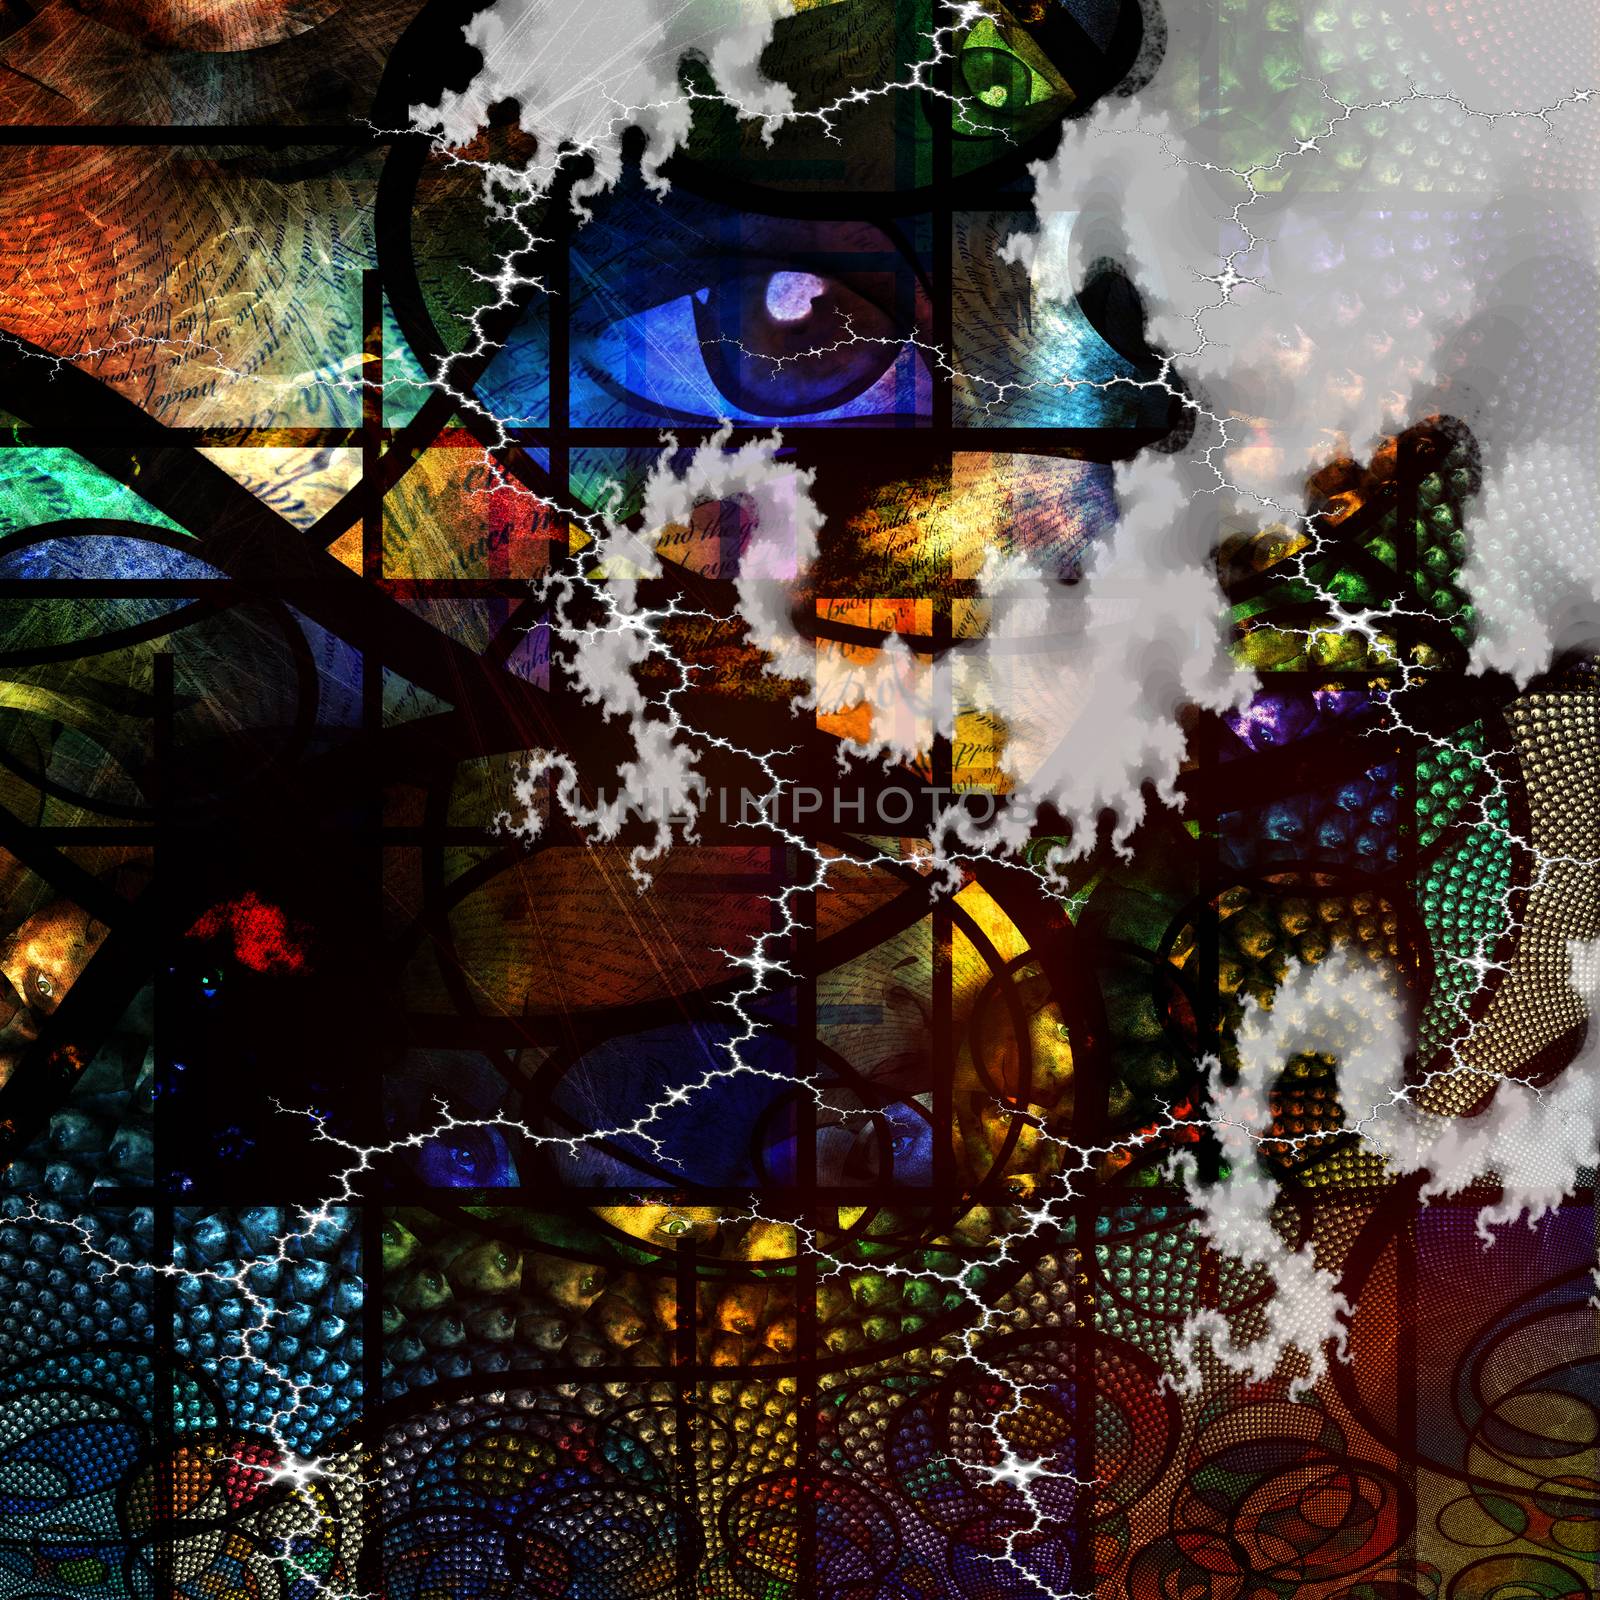 Abstract artistic image with text and human eye